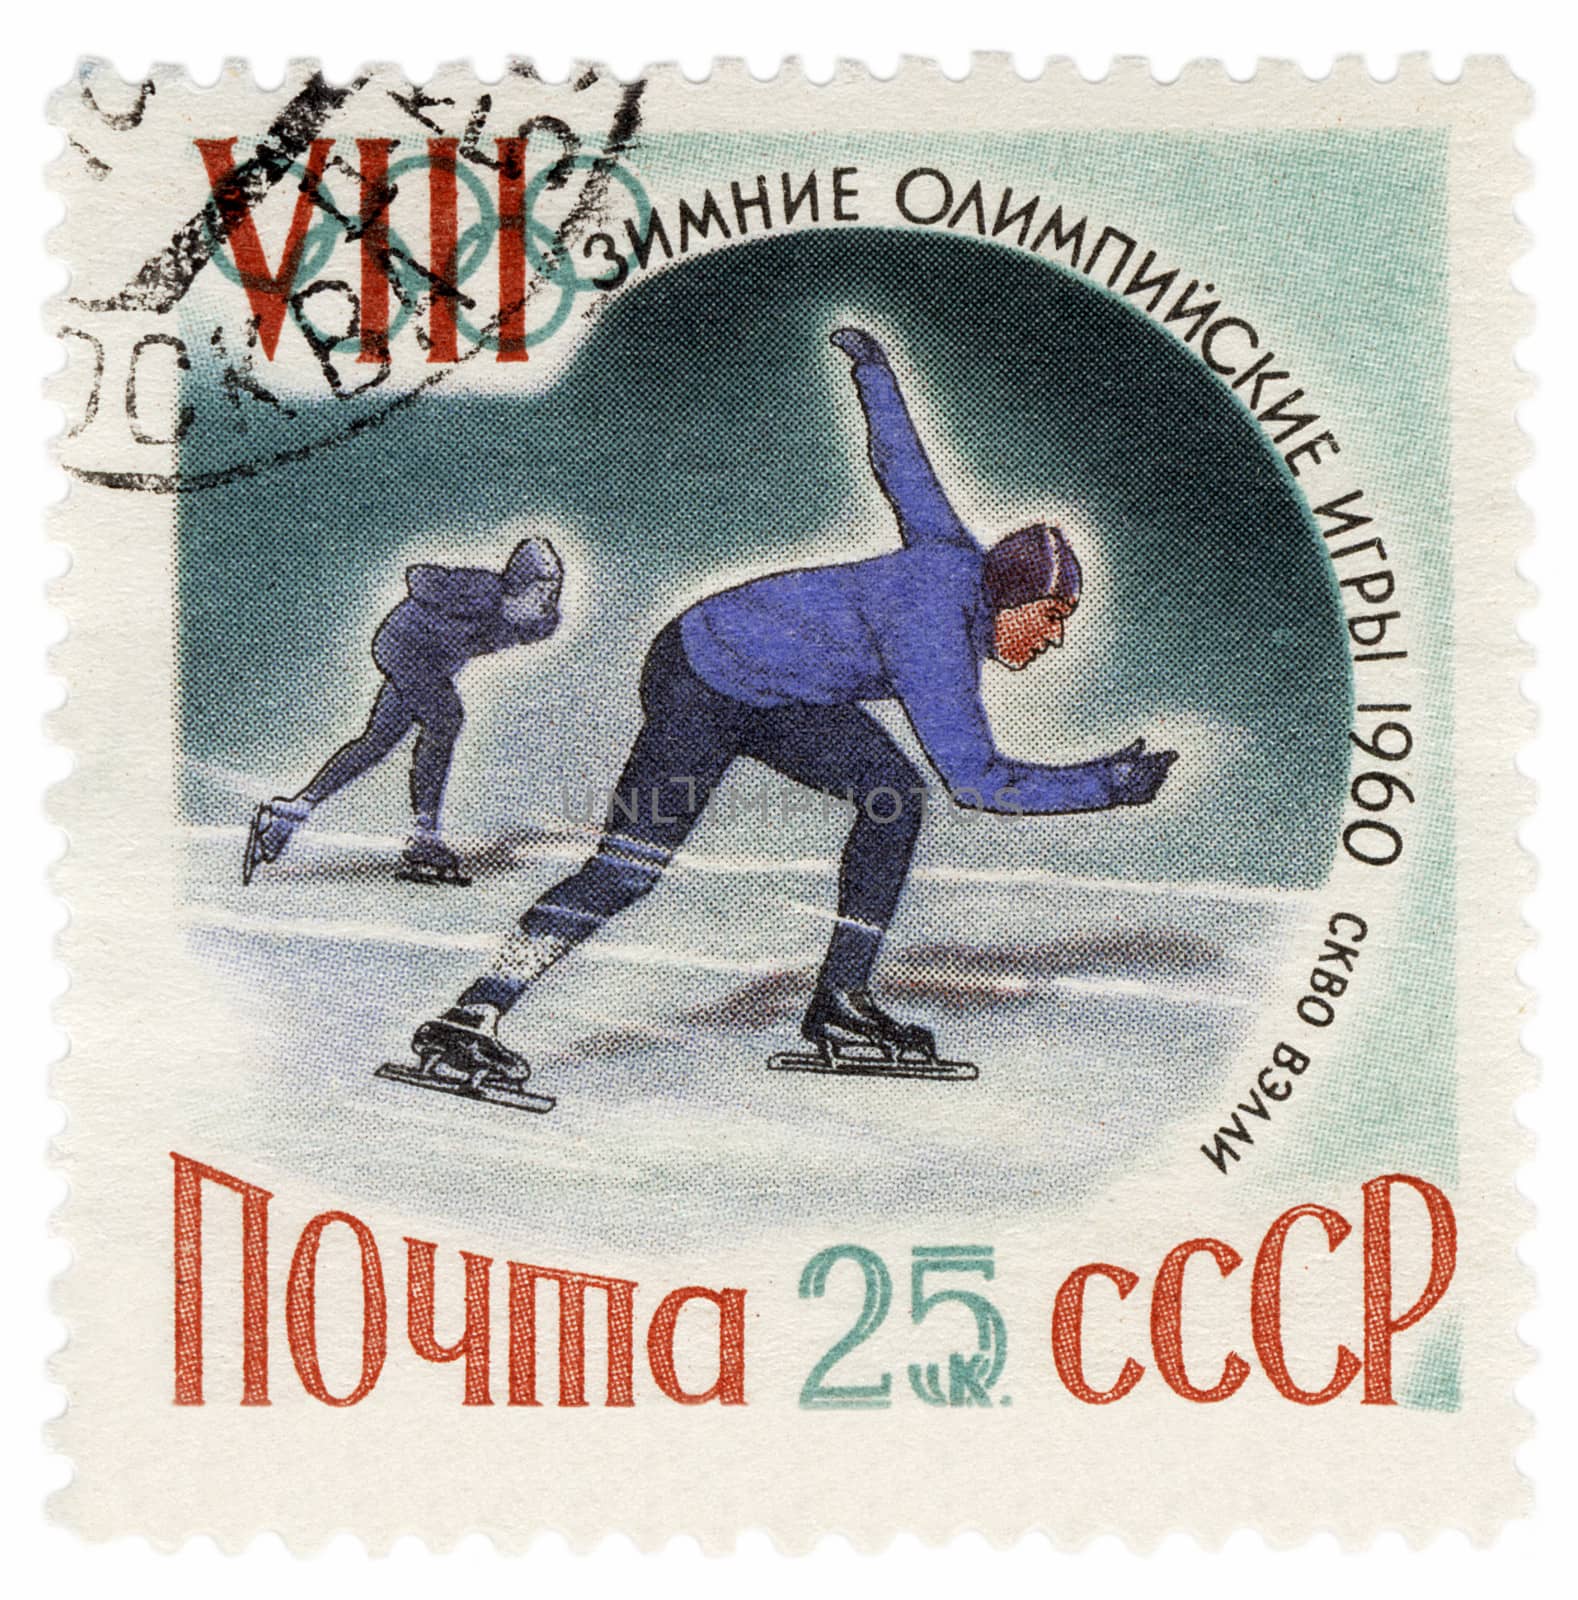 USSR - CIRCA 1960: A post stamp printed in the USSR shows running track skaters, dedicated to the Winter Olympic Games in Squaw Valley, series, circa 1960